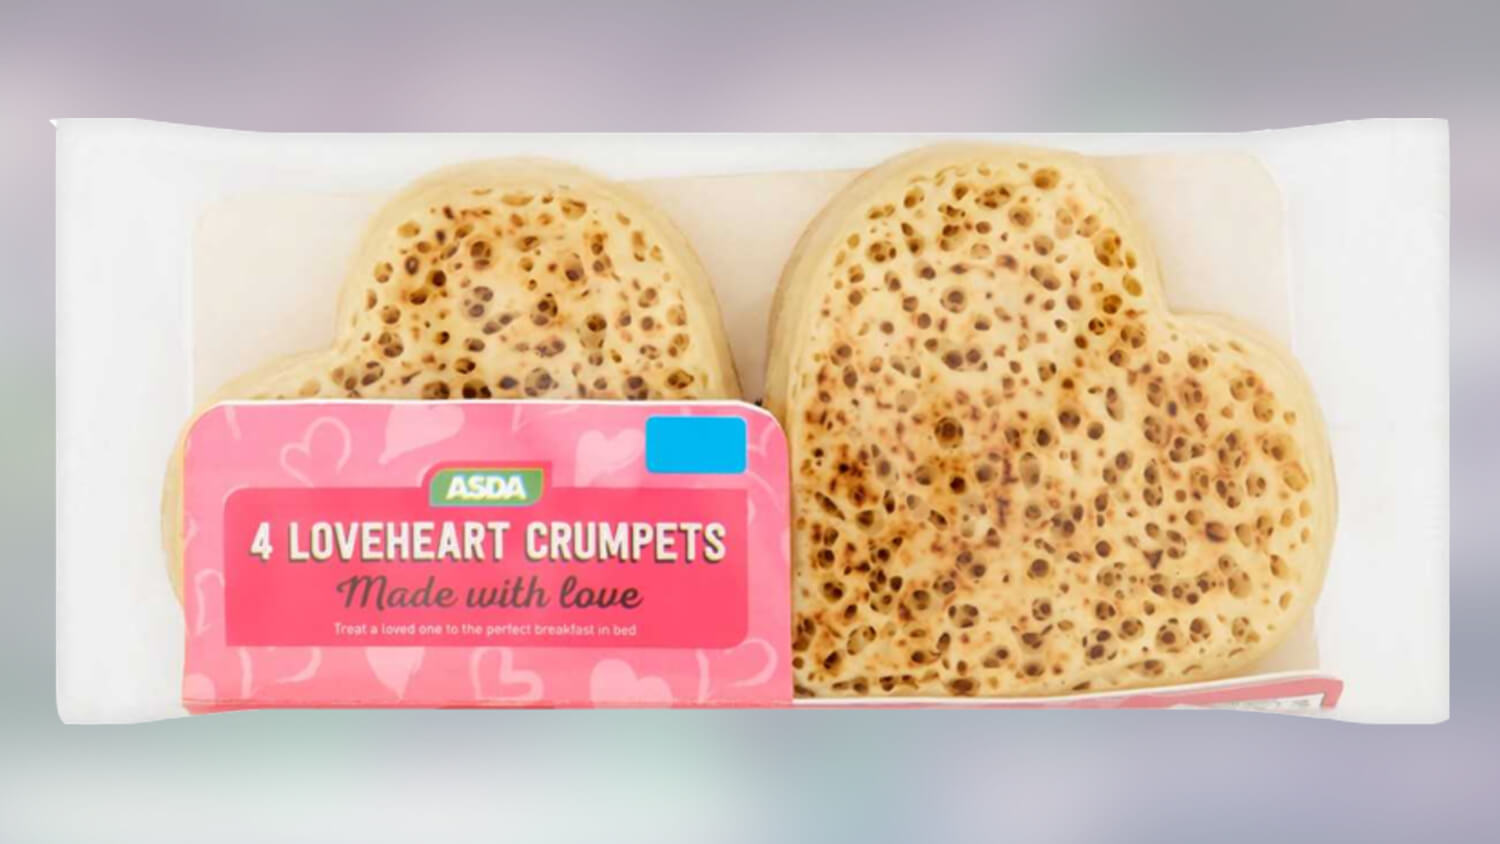 Asda Launches Vegan Heart-Shaped Crumpets for Valentine's Day